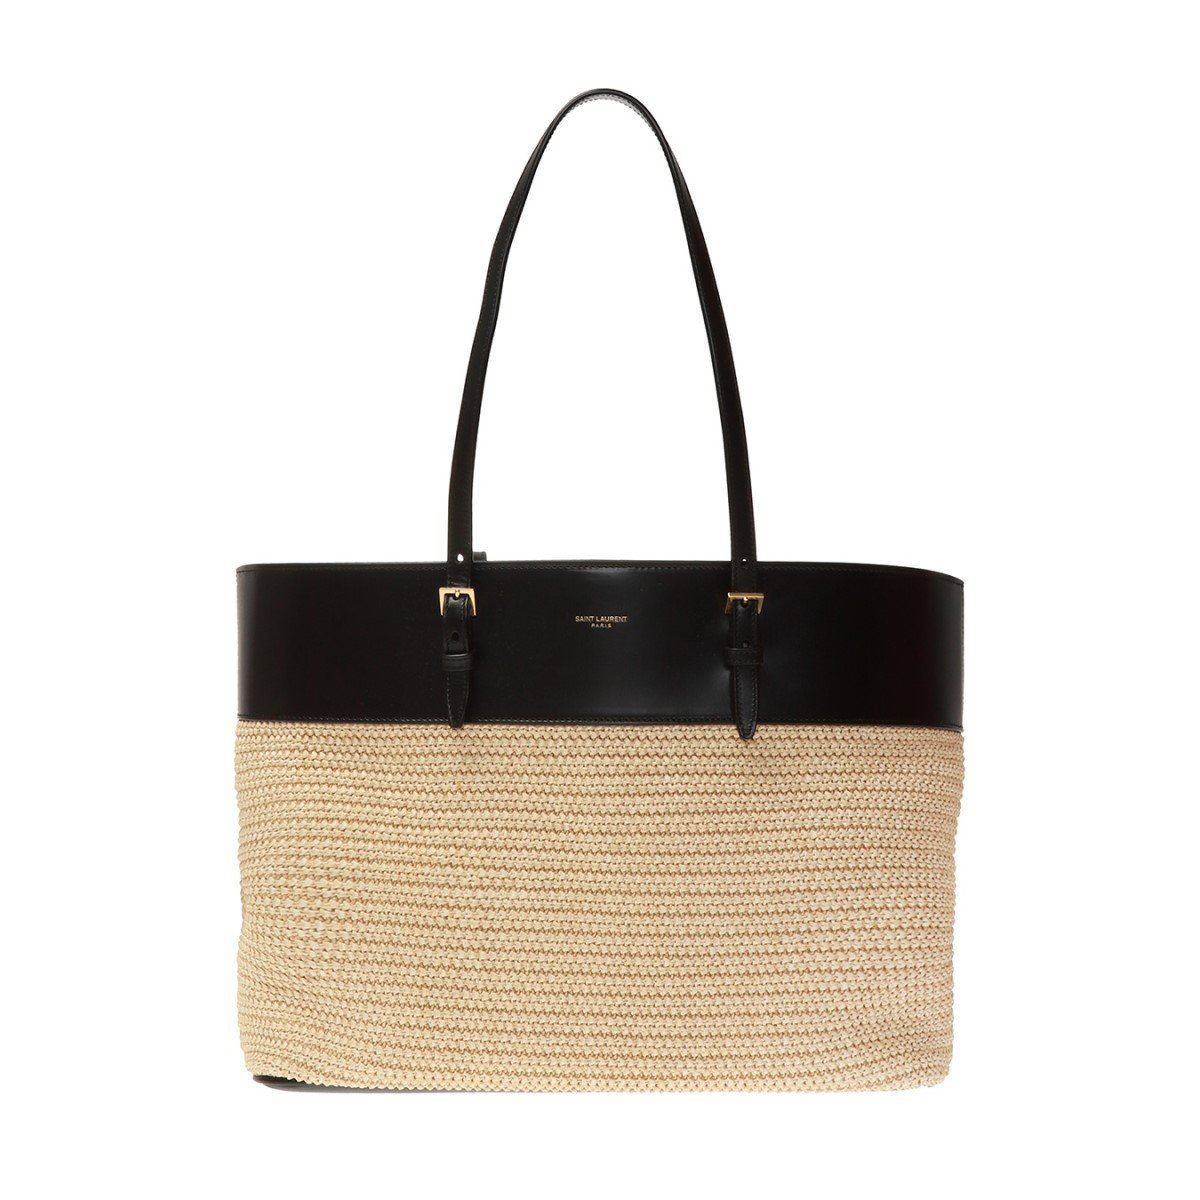 Saint Laurent Boucle Raffia Black Leather Trim Medium Shopping Tote 608962 at_Queen_Bee_of_Beverly_Hills